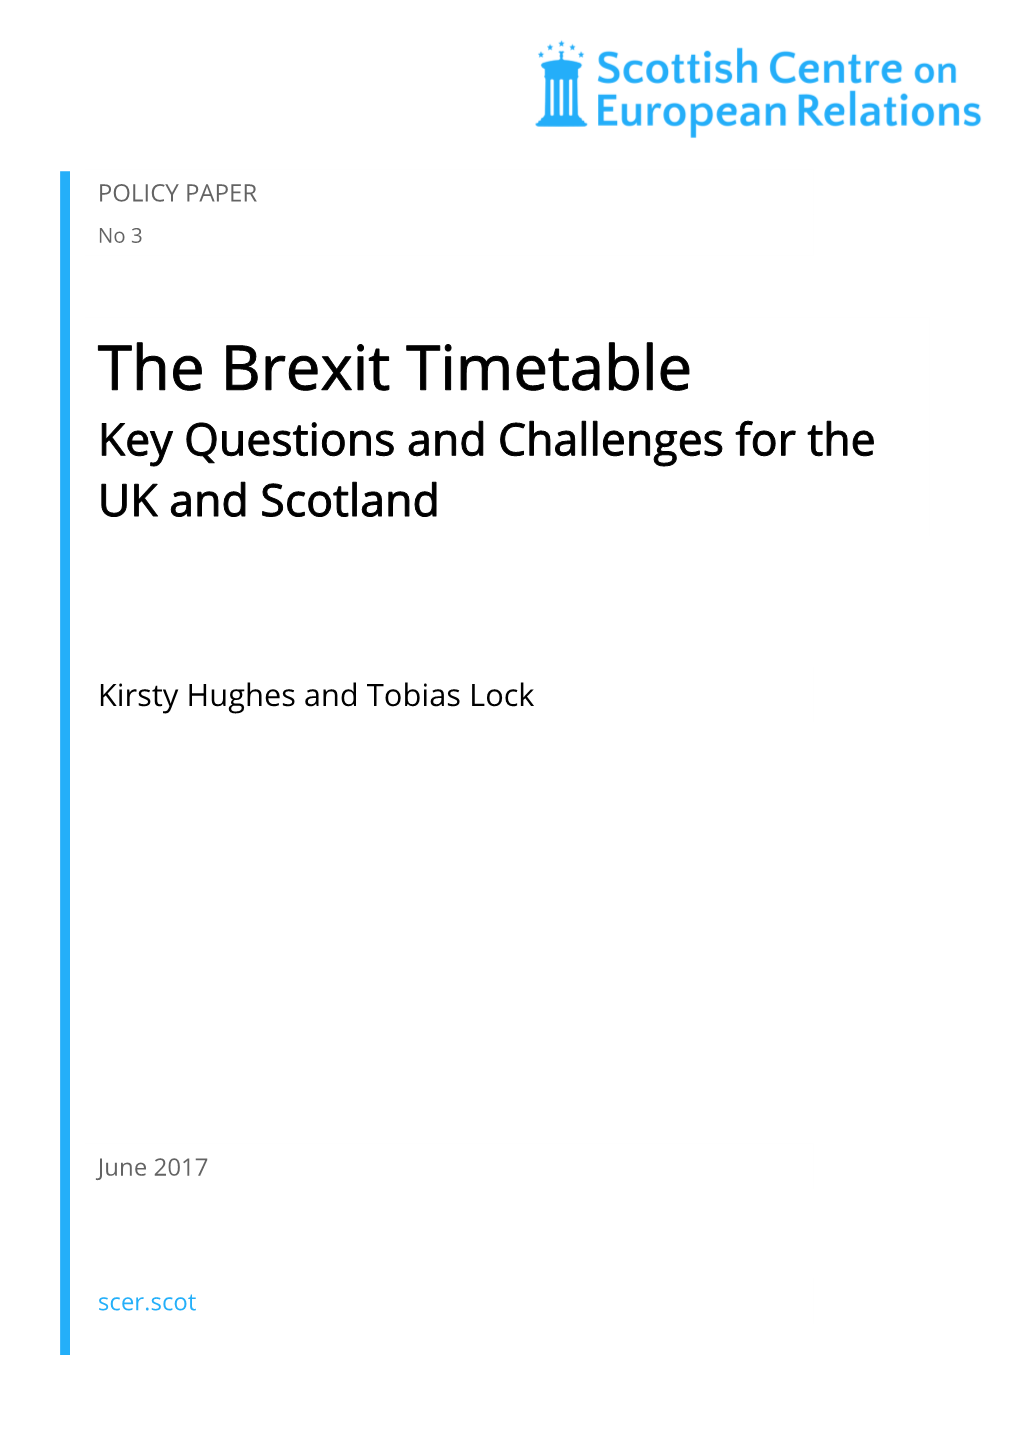 The Brexit Timetable Key Questions and Challenges for the UK and Scotland